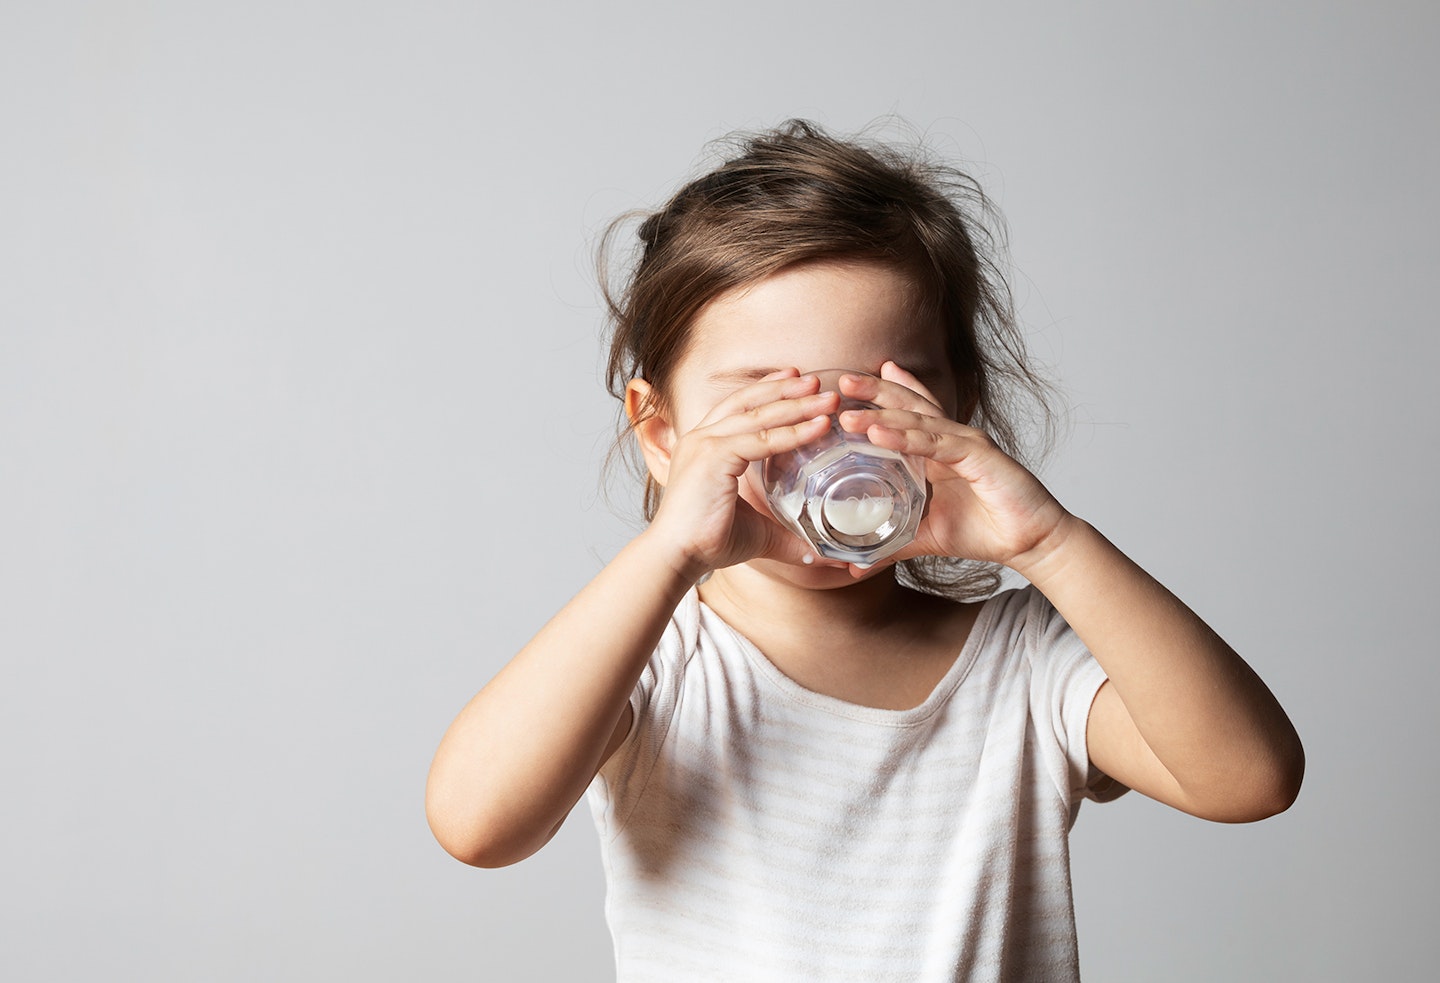 It’s totally fine if your toddler won’t drink milk (here’s what to give them instead)